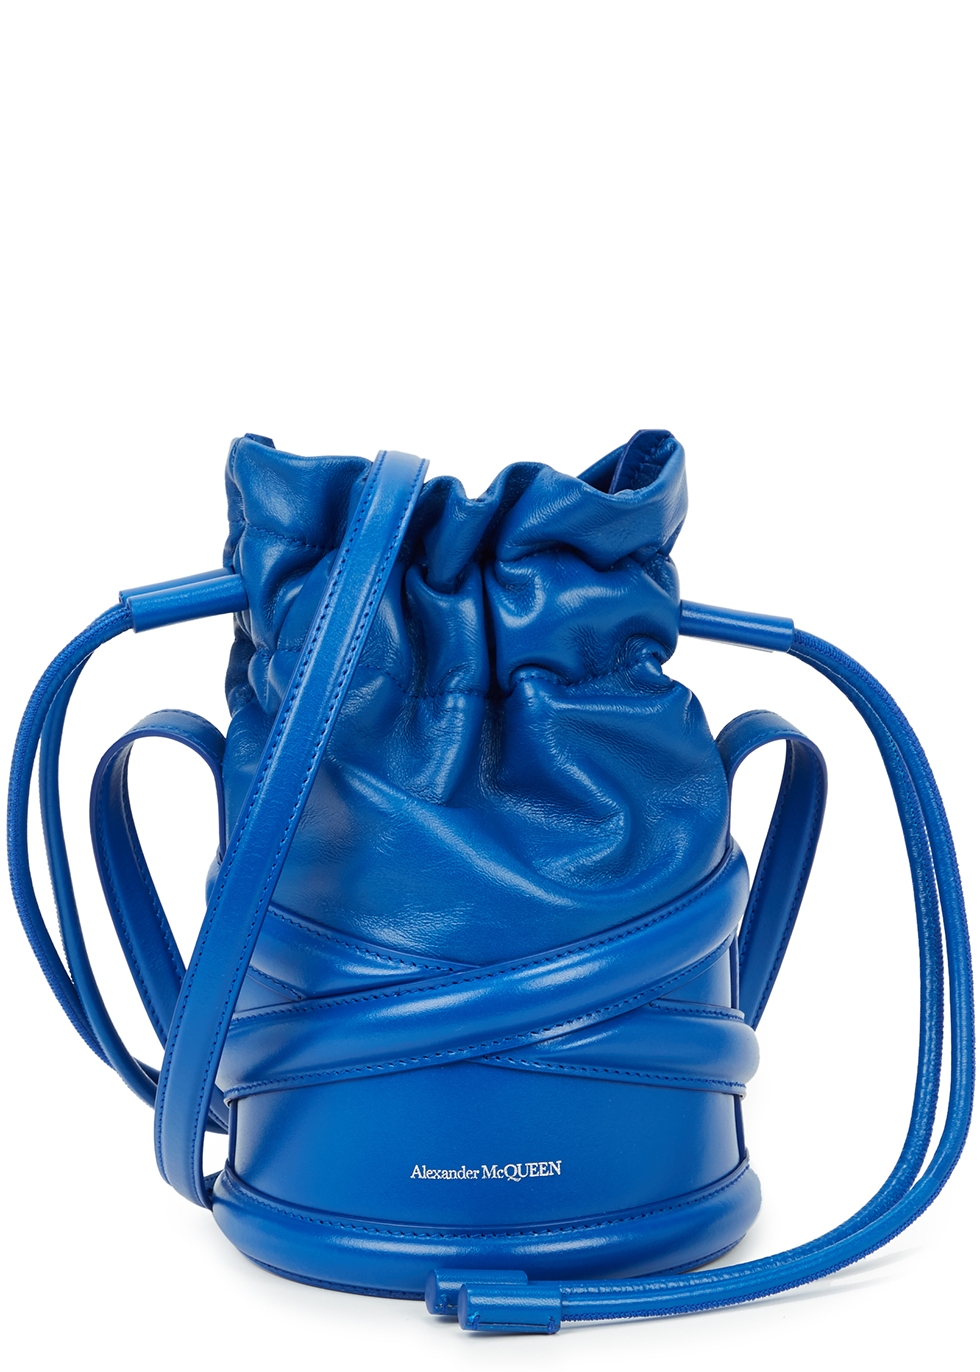 The Soft Curve small blue leather bucket bag